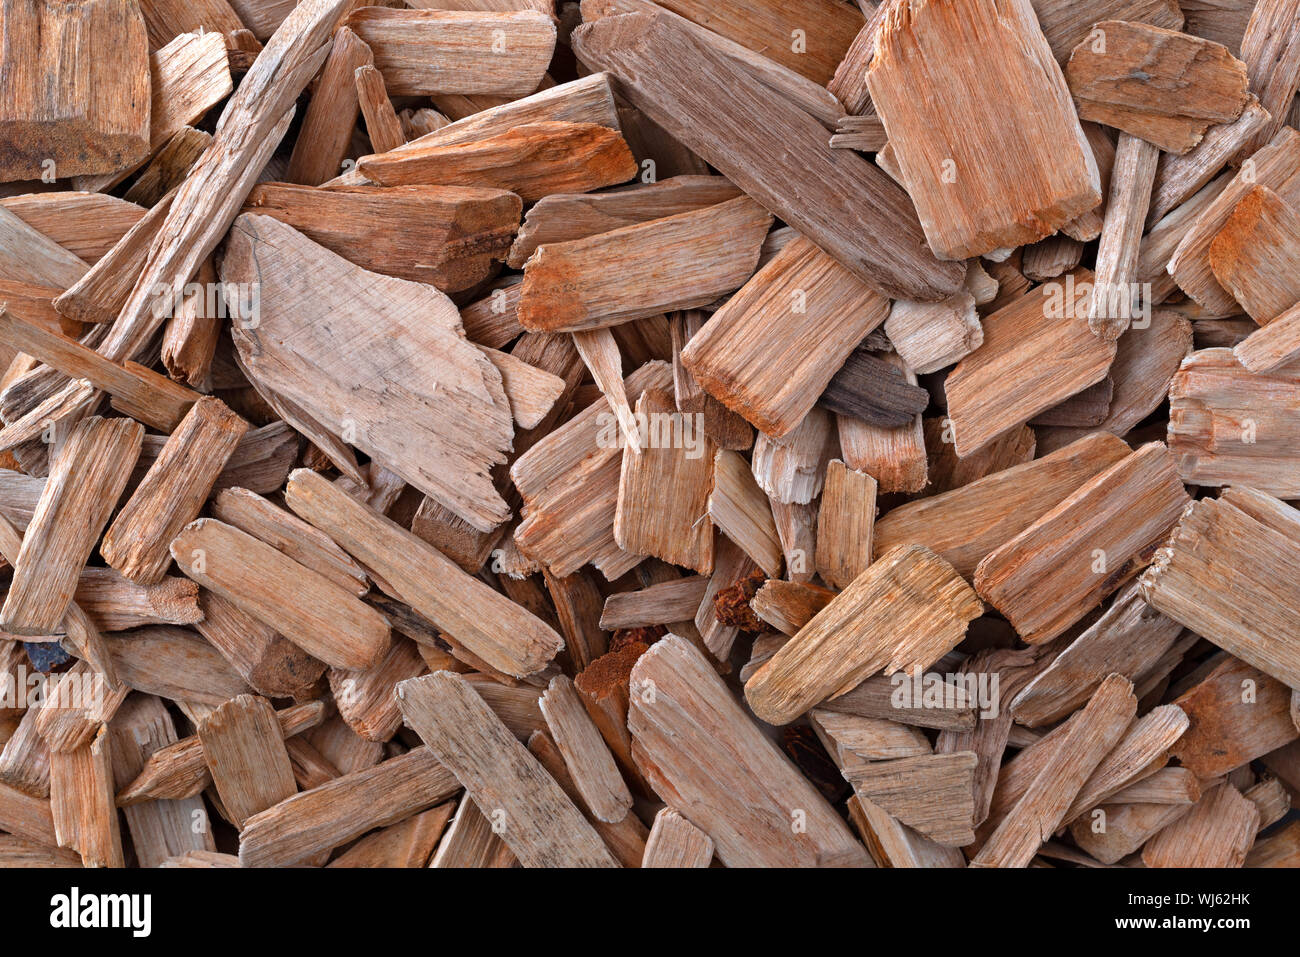 Overhead view of a group of alder smoking chips illuminated with natural lighting. Stock Photo